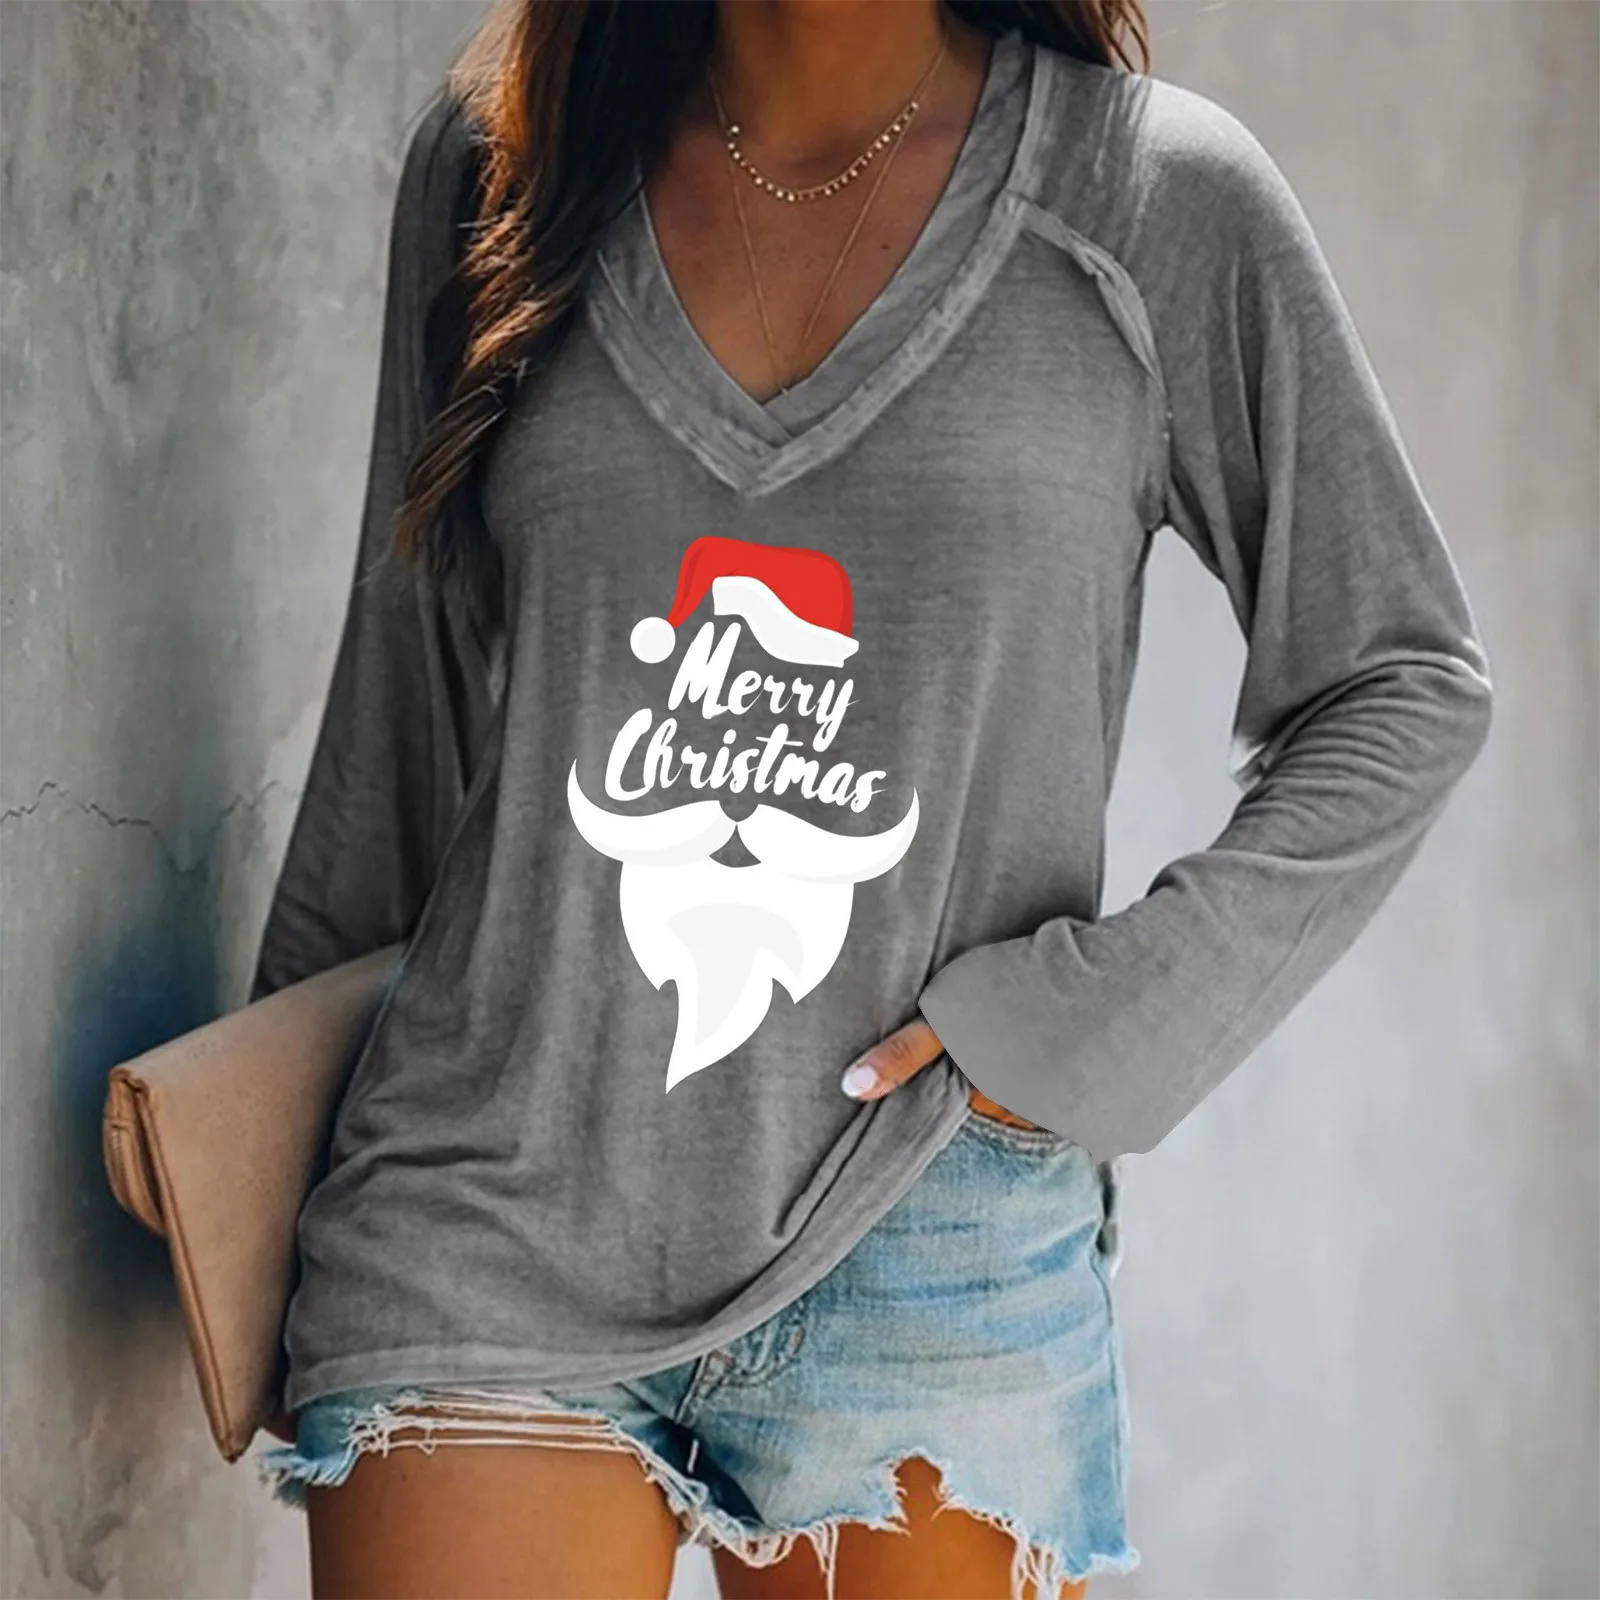 

Women Fashion Christmas Top Blouse Casual V Neck Long Sleeve Casual Printed T-Shirt Merry Dressy Short Sleeve Shirts for Women